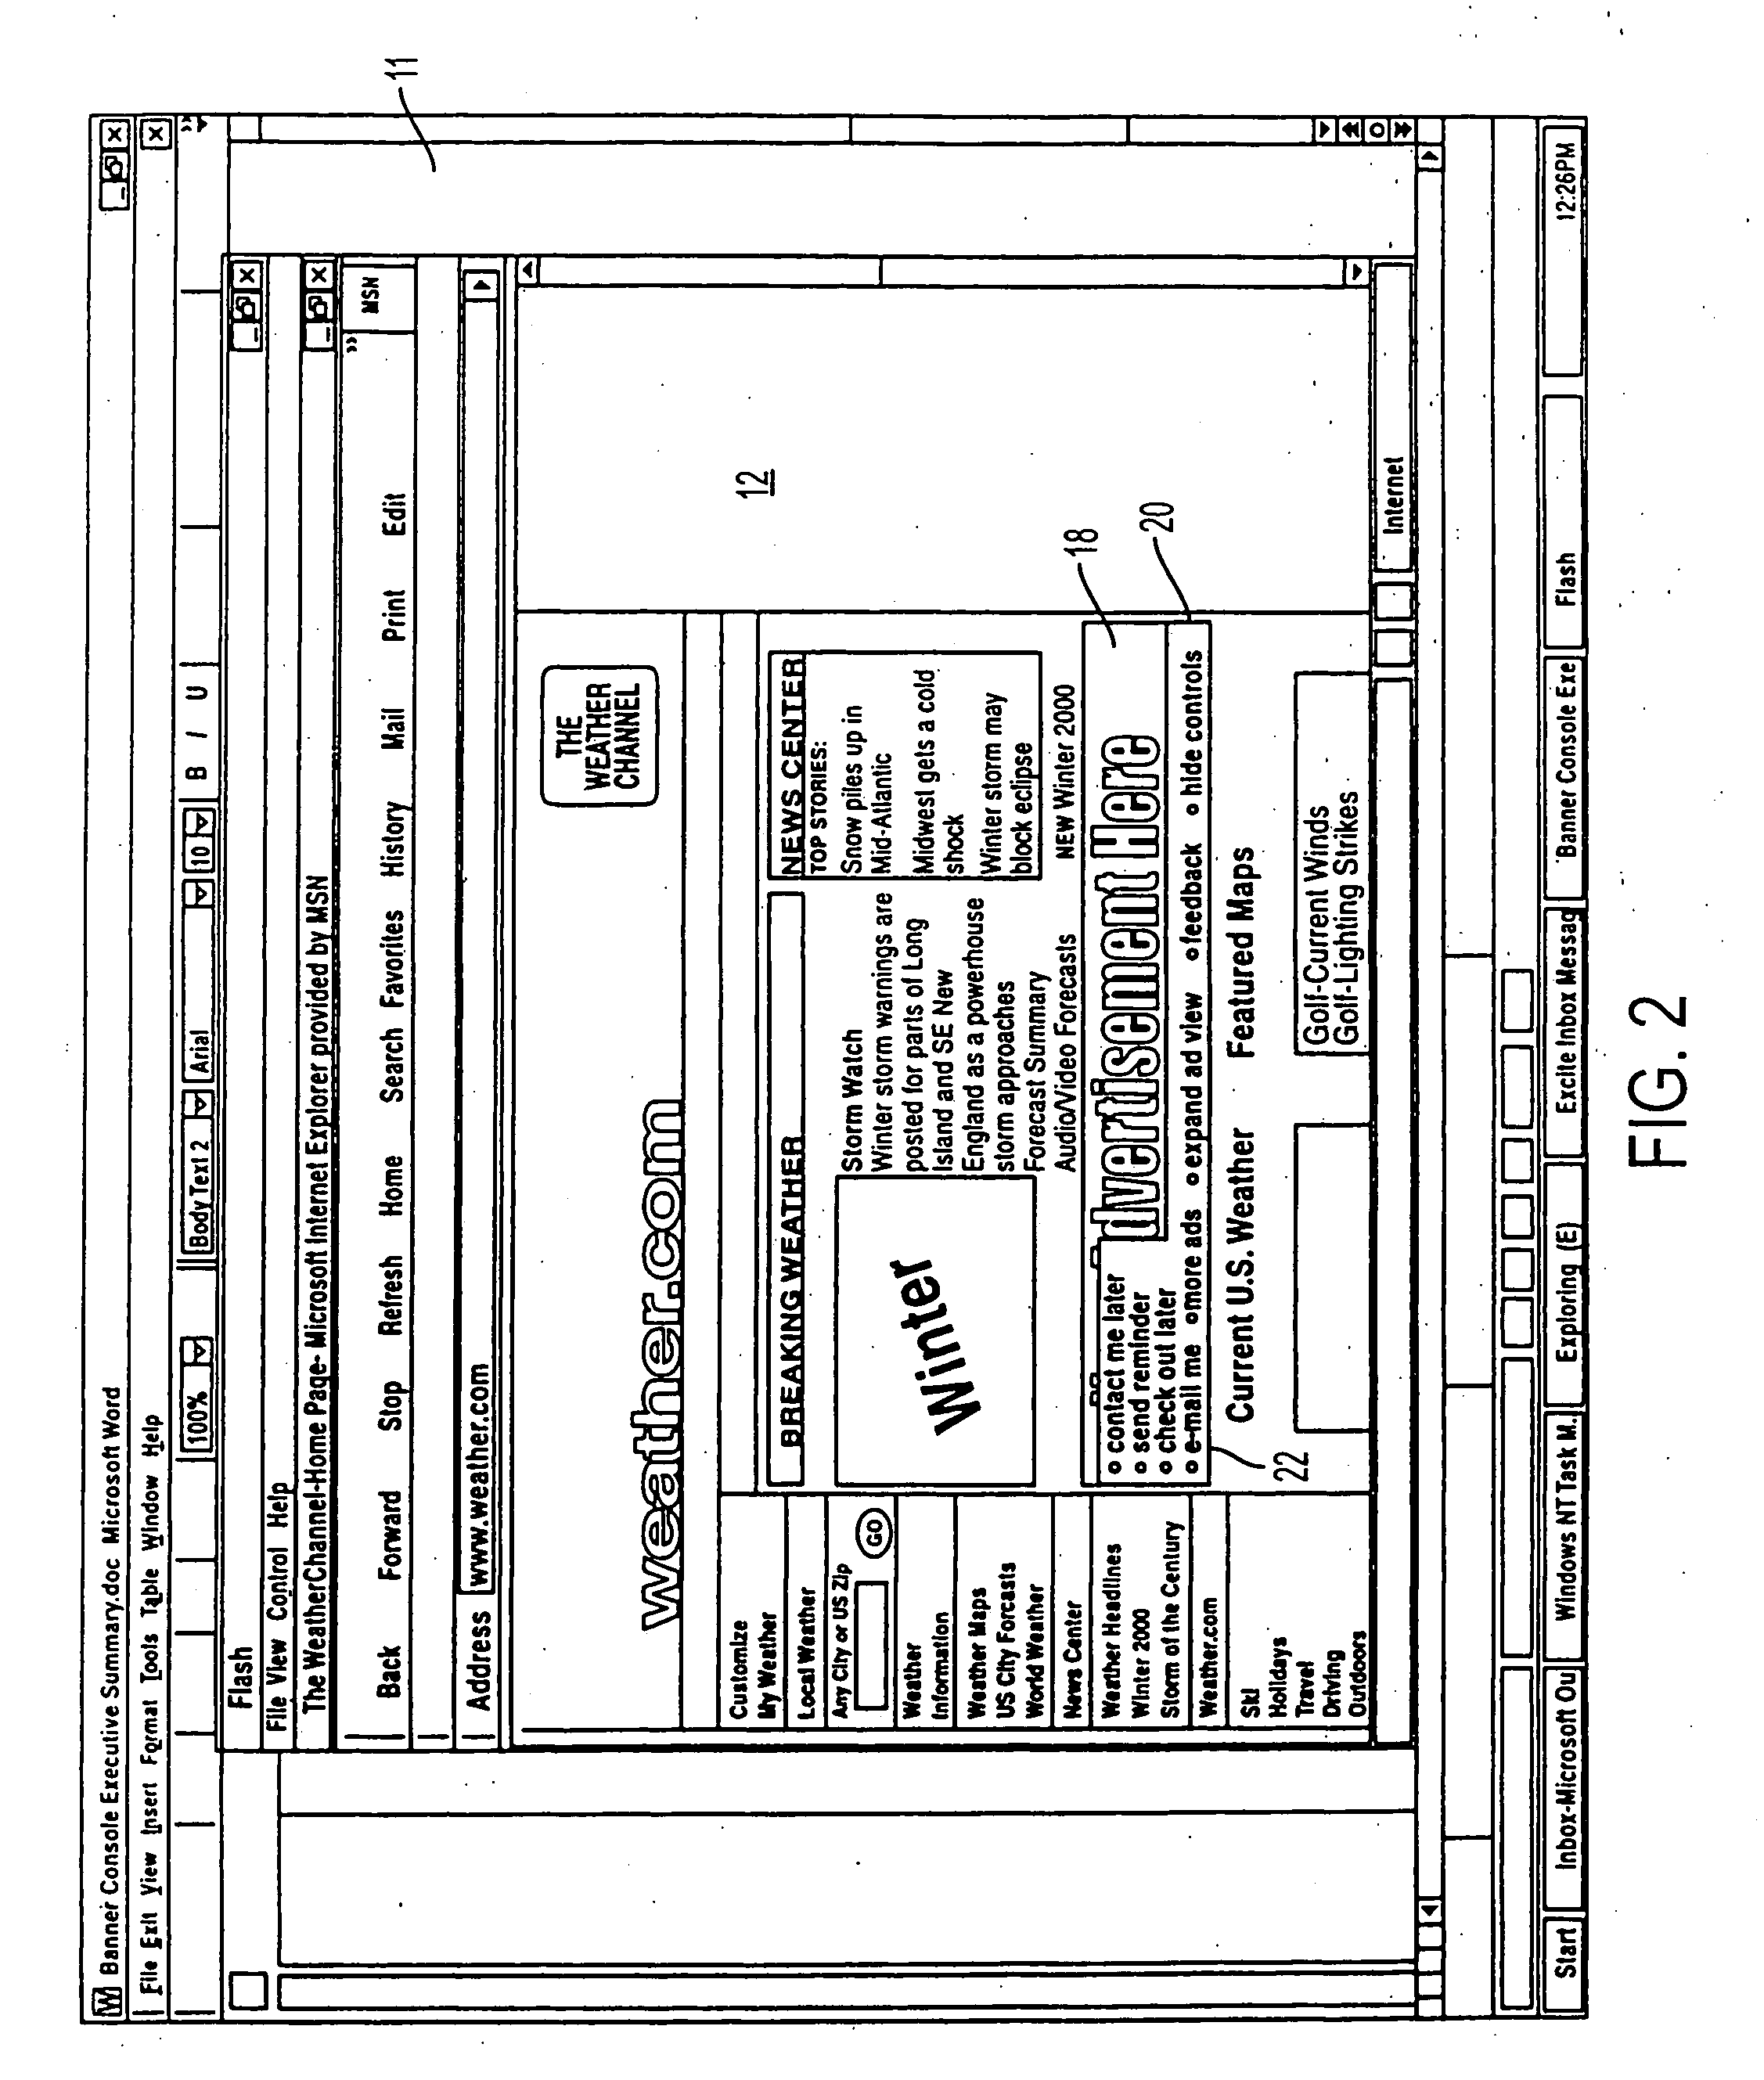 Method for adding a user selectable function to a hyperlink